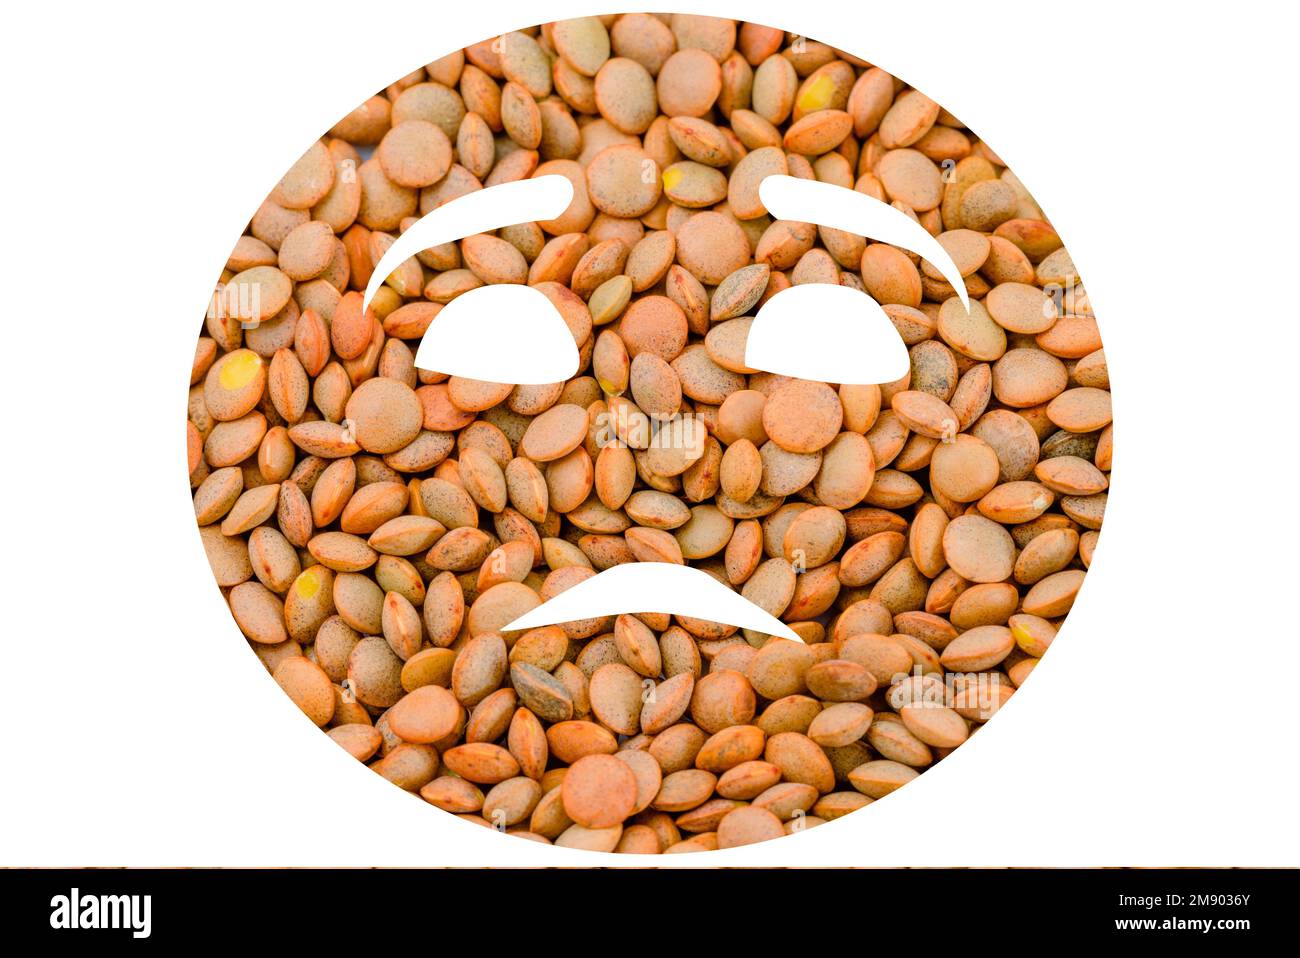 Lentil beans arranged on a white background to look like an emoji Stock Photo